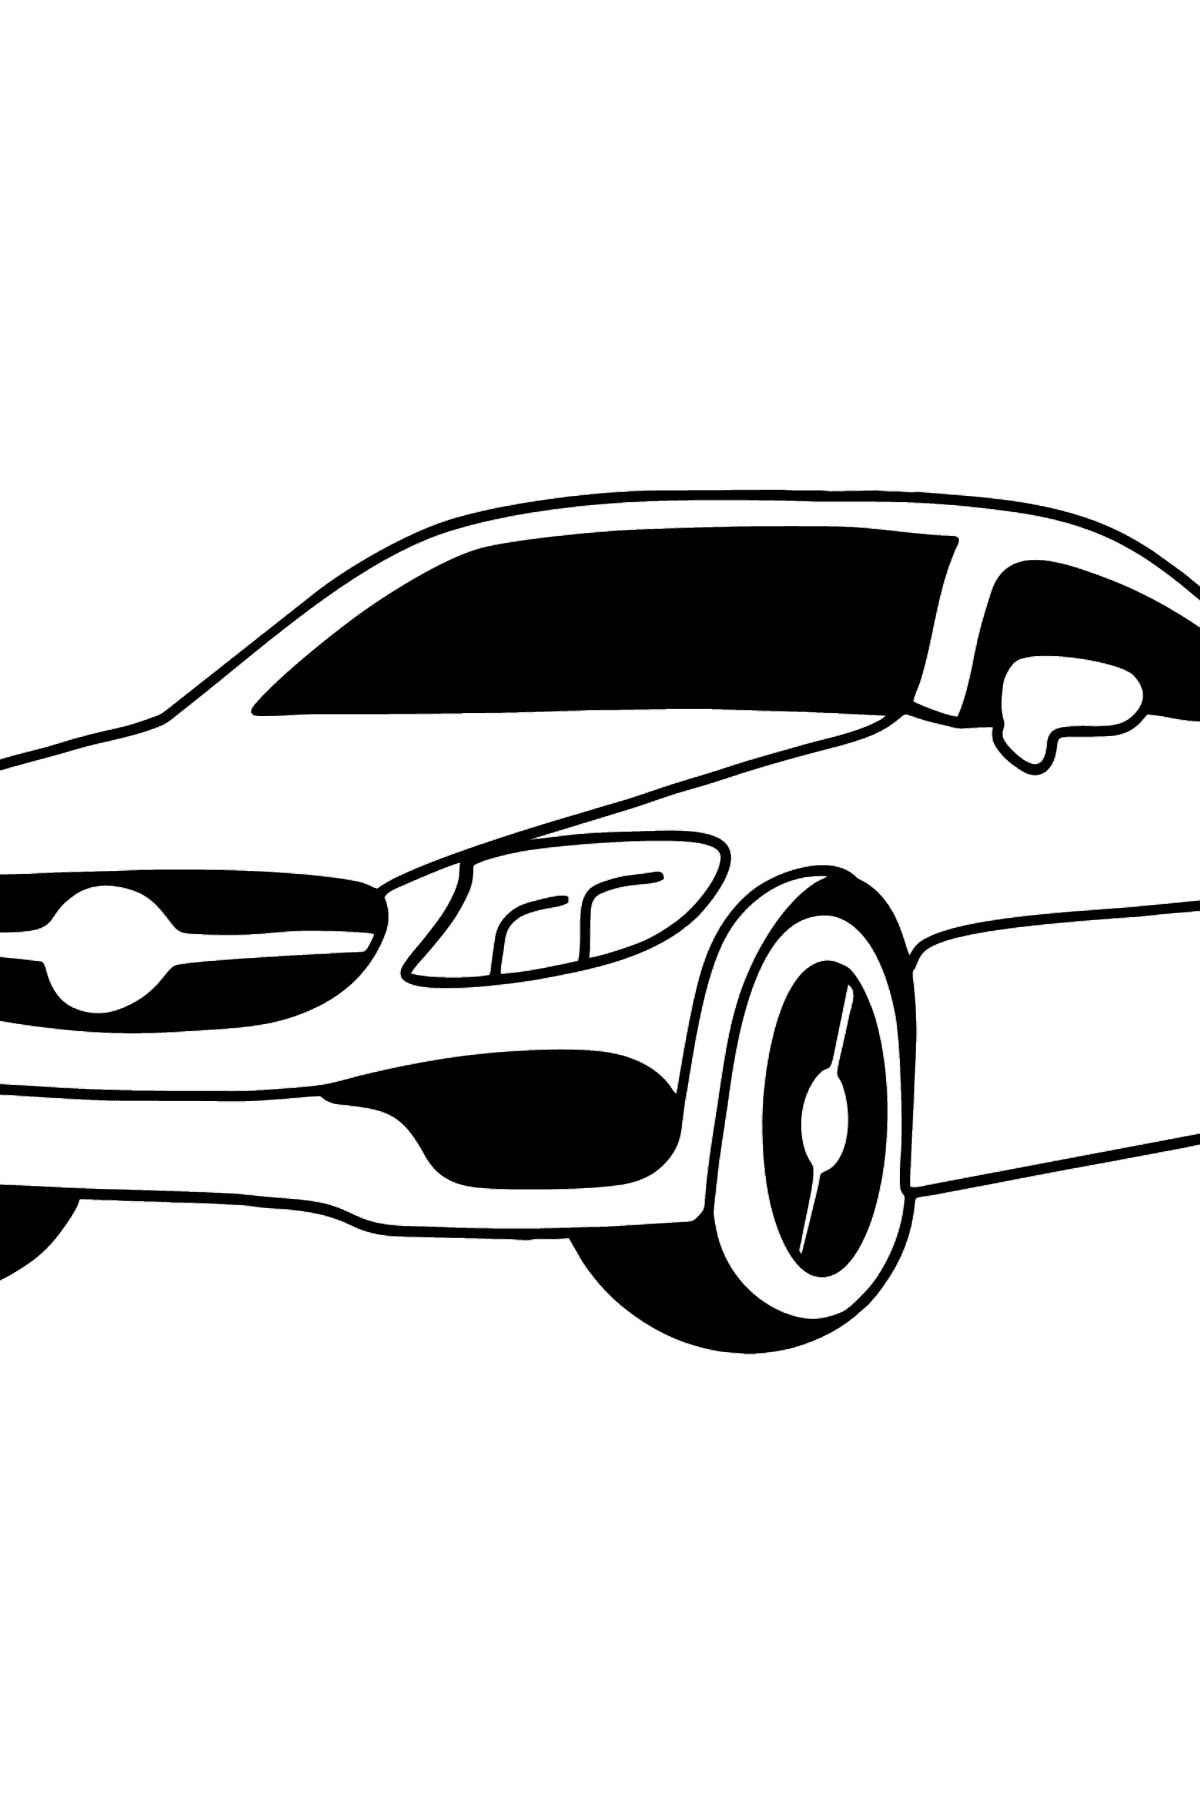 Mercedes C63 AMG car coloring page - Coloring Pages for Kids